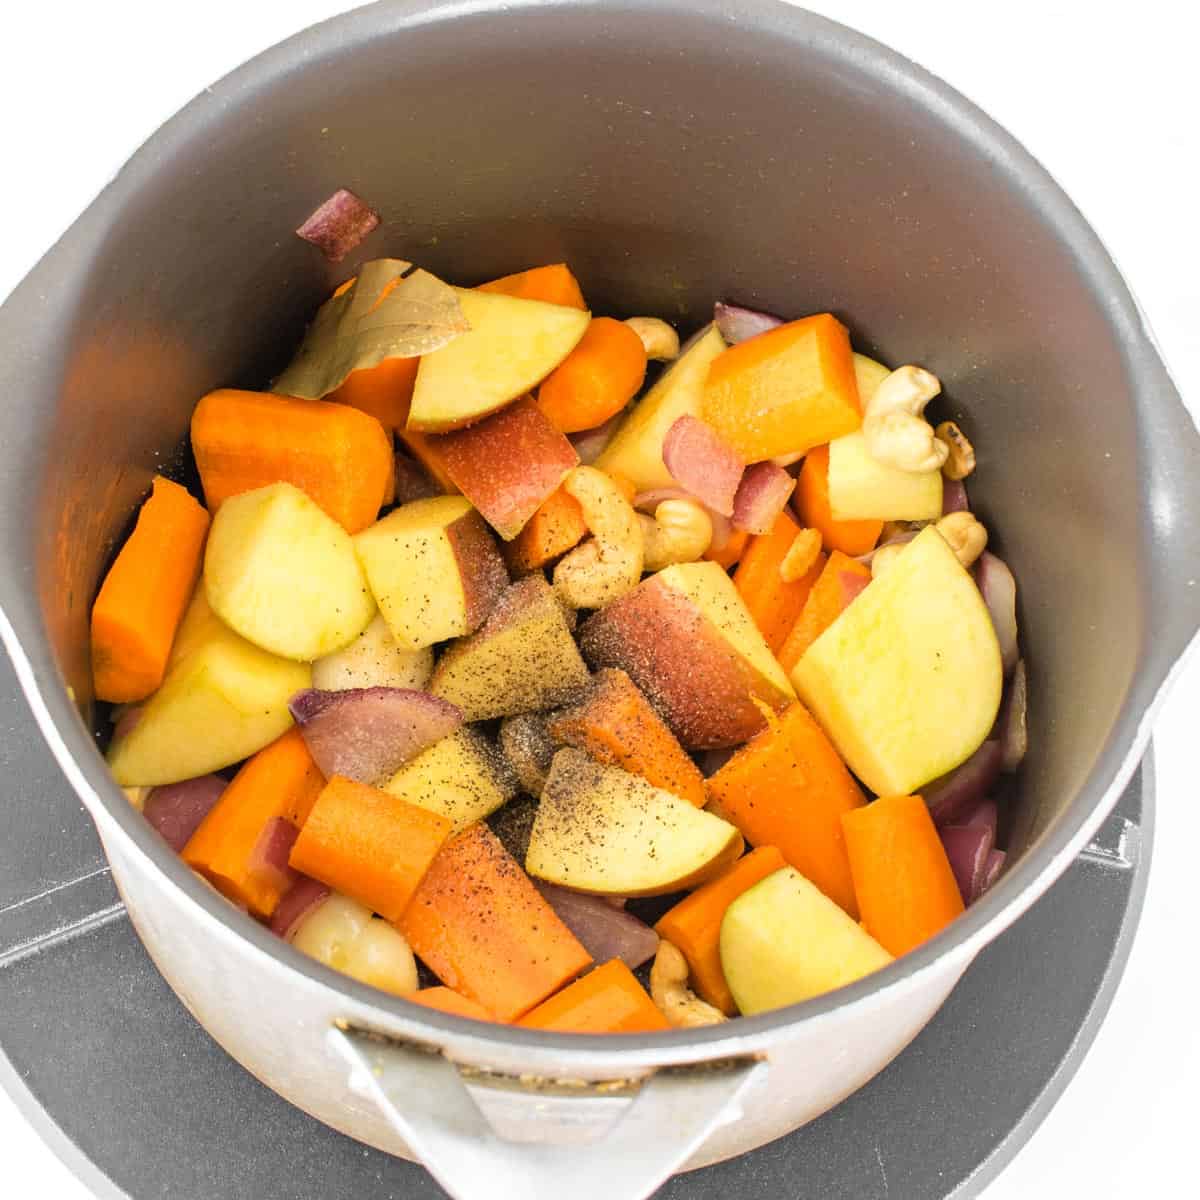 seasoned fruit and vegetables being cooked in the stockpot.